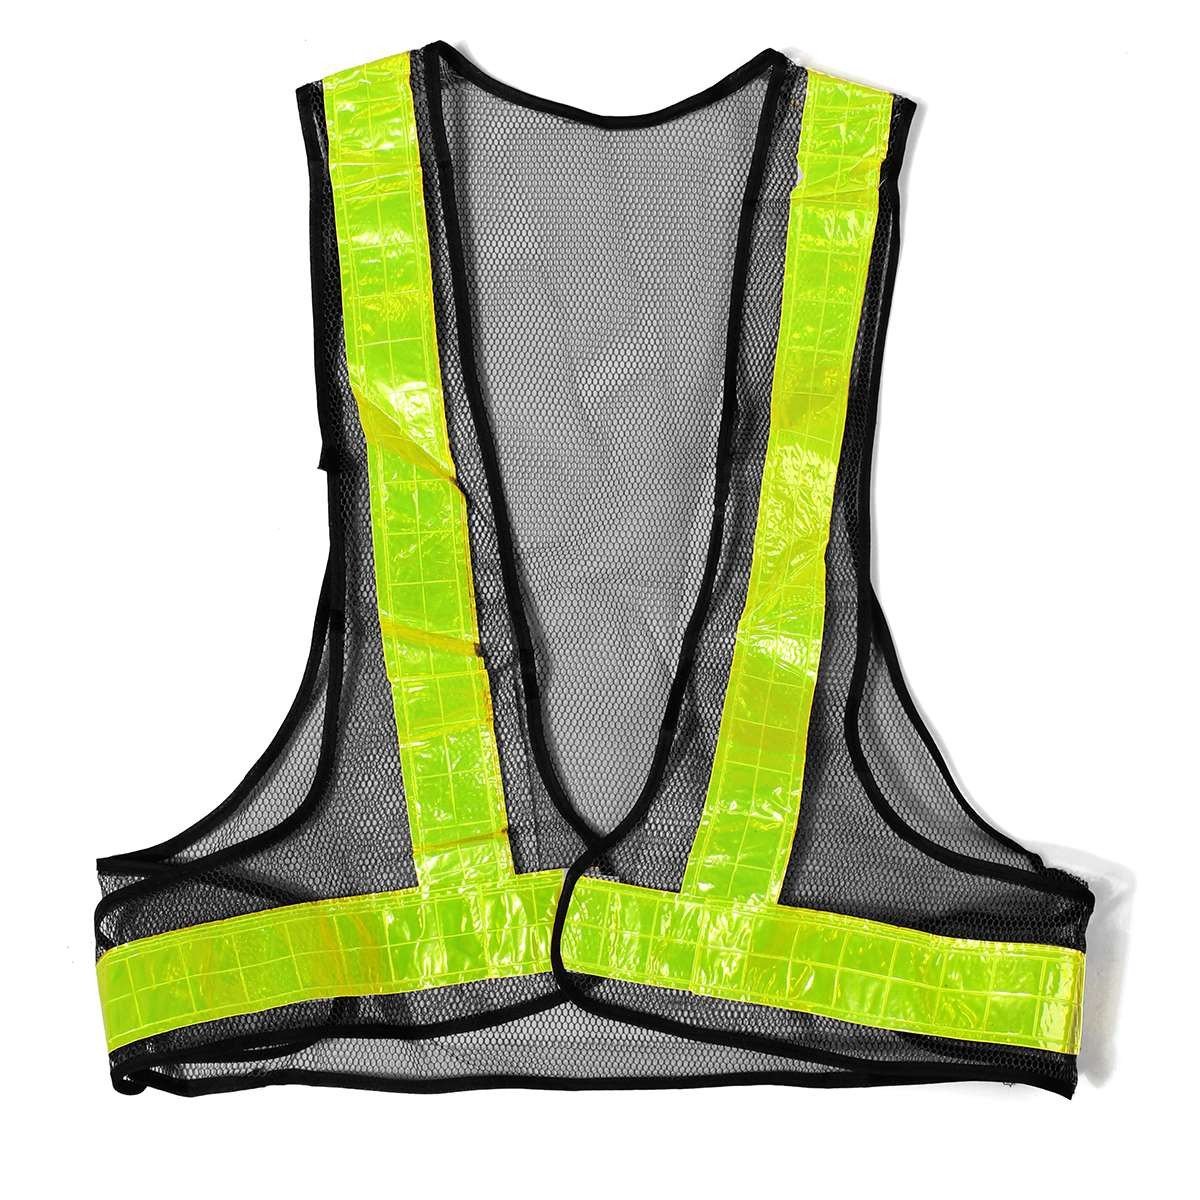 Distributor of Ecnotools HYM006 High Reflective Safety Vest in UAE